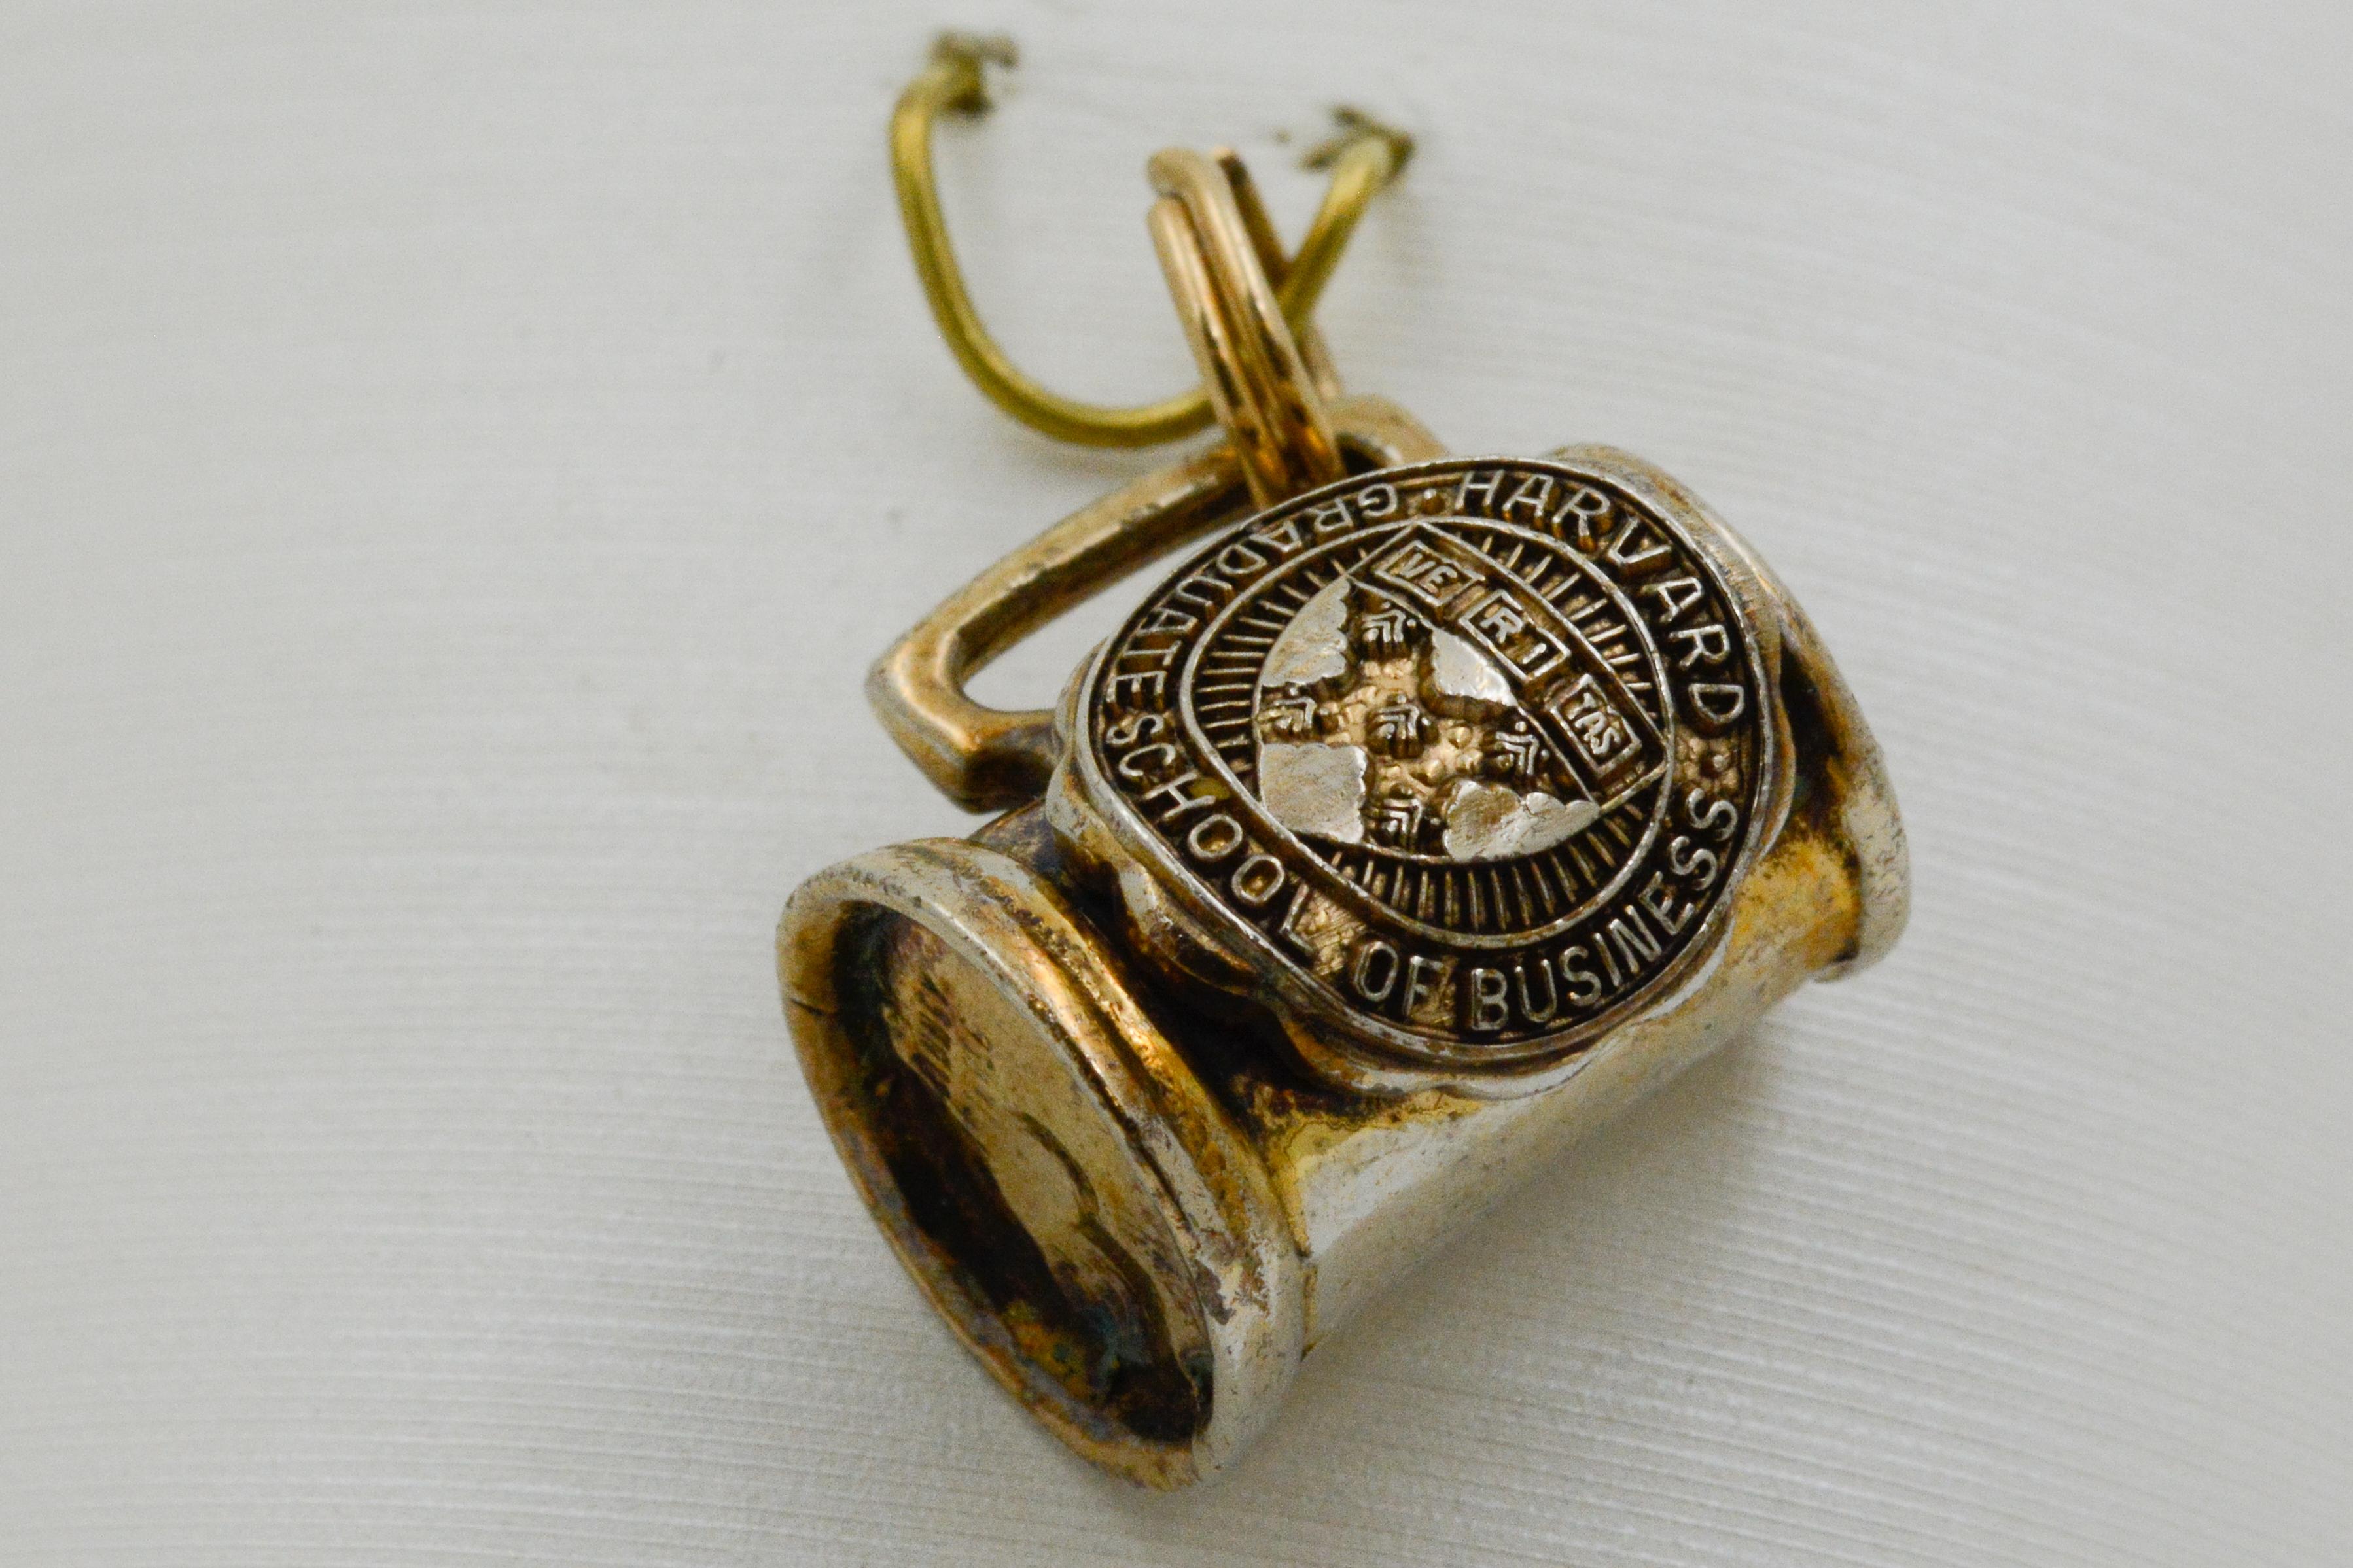 This vintage sterling silver stein charm features the crest of Harvard Business school for graduates. On the crest the words 